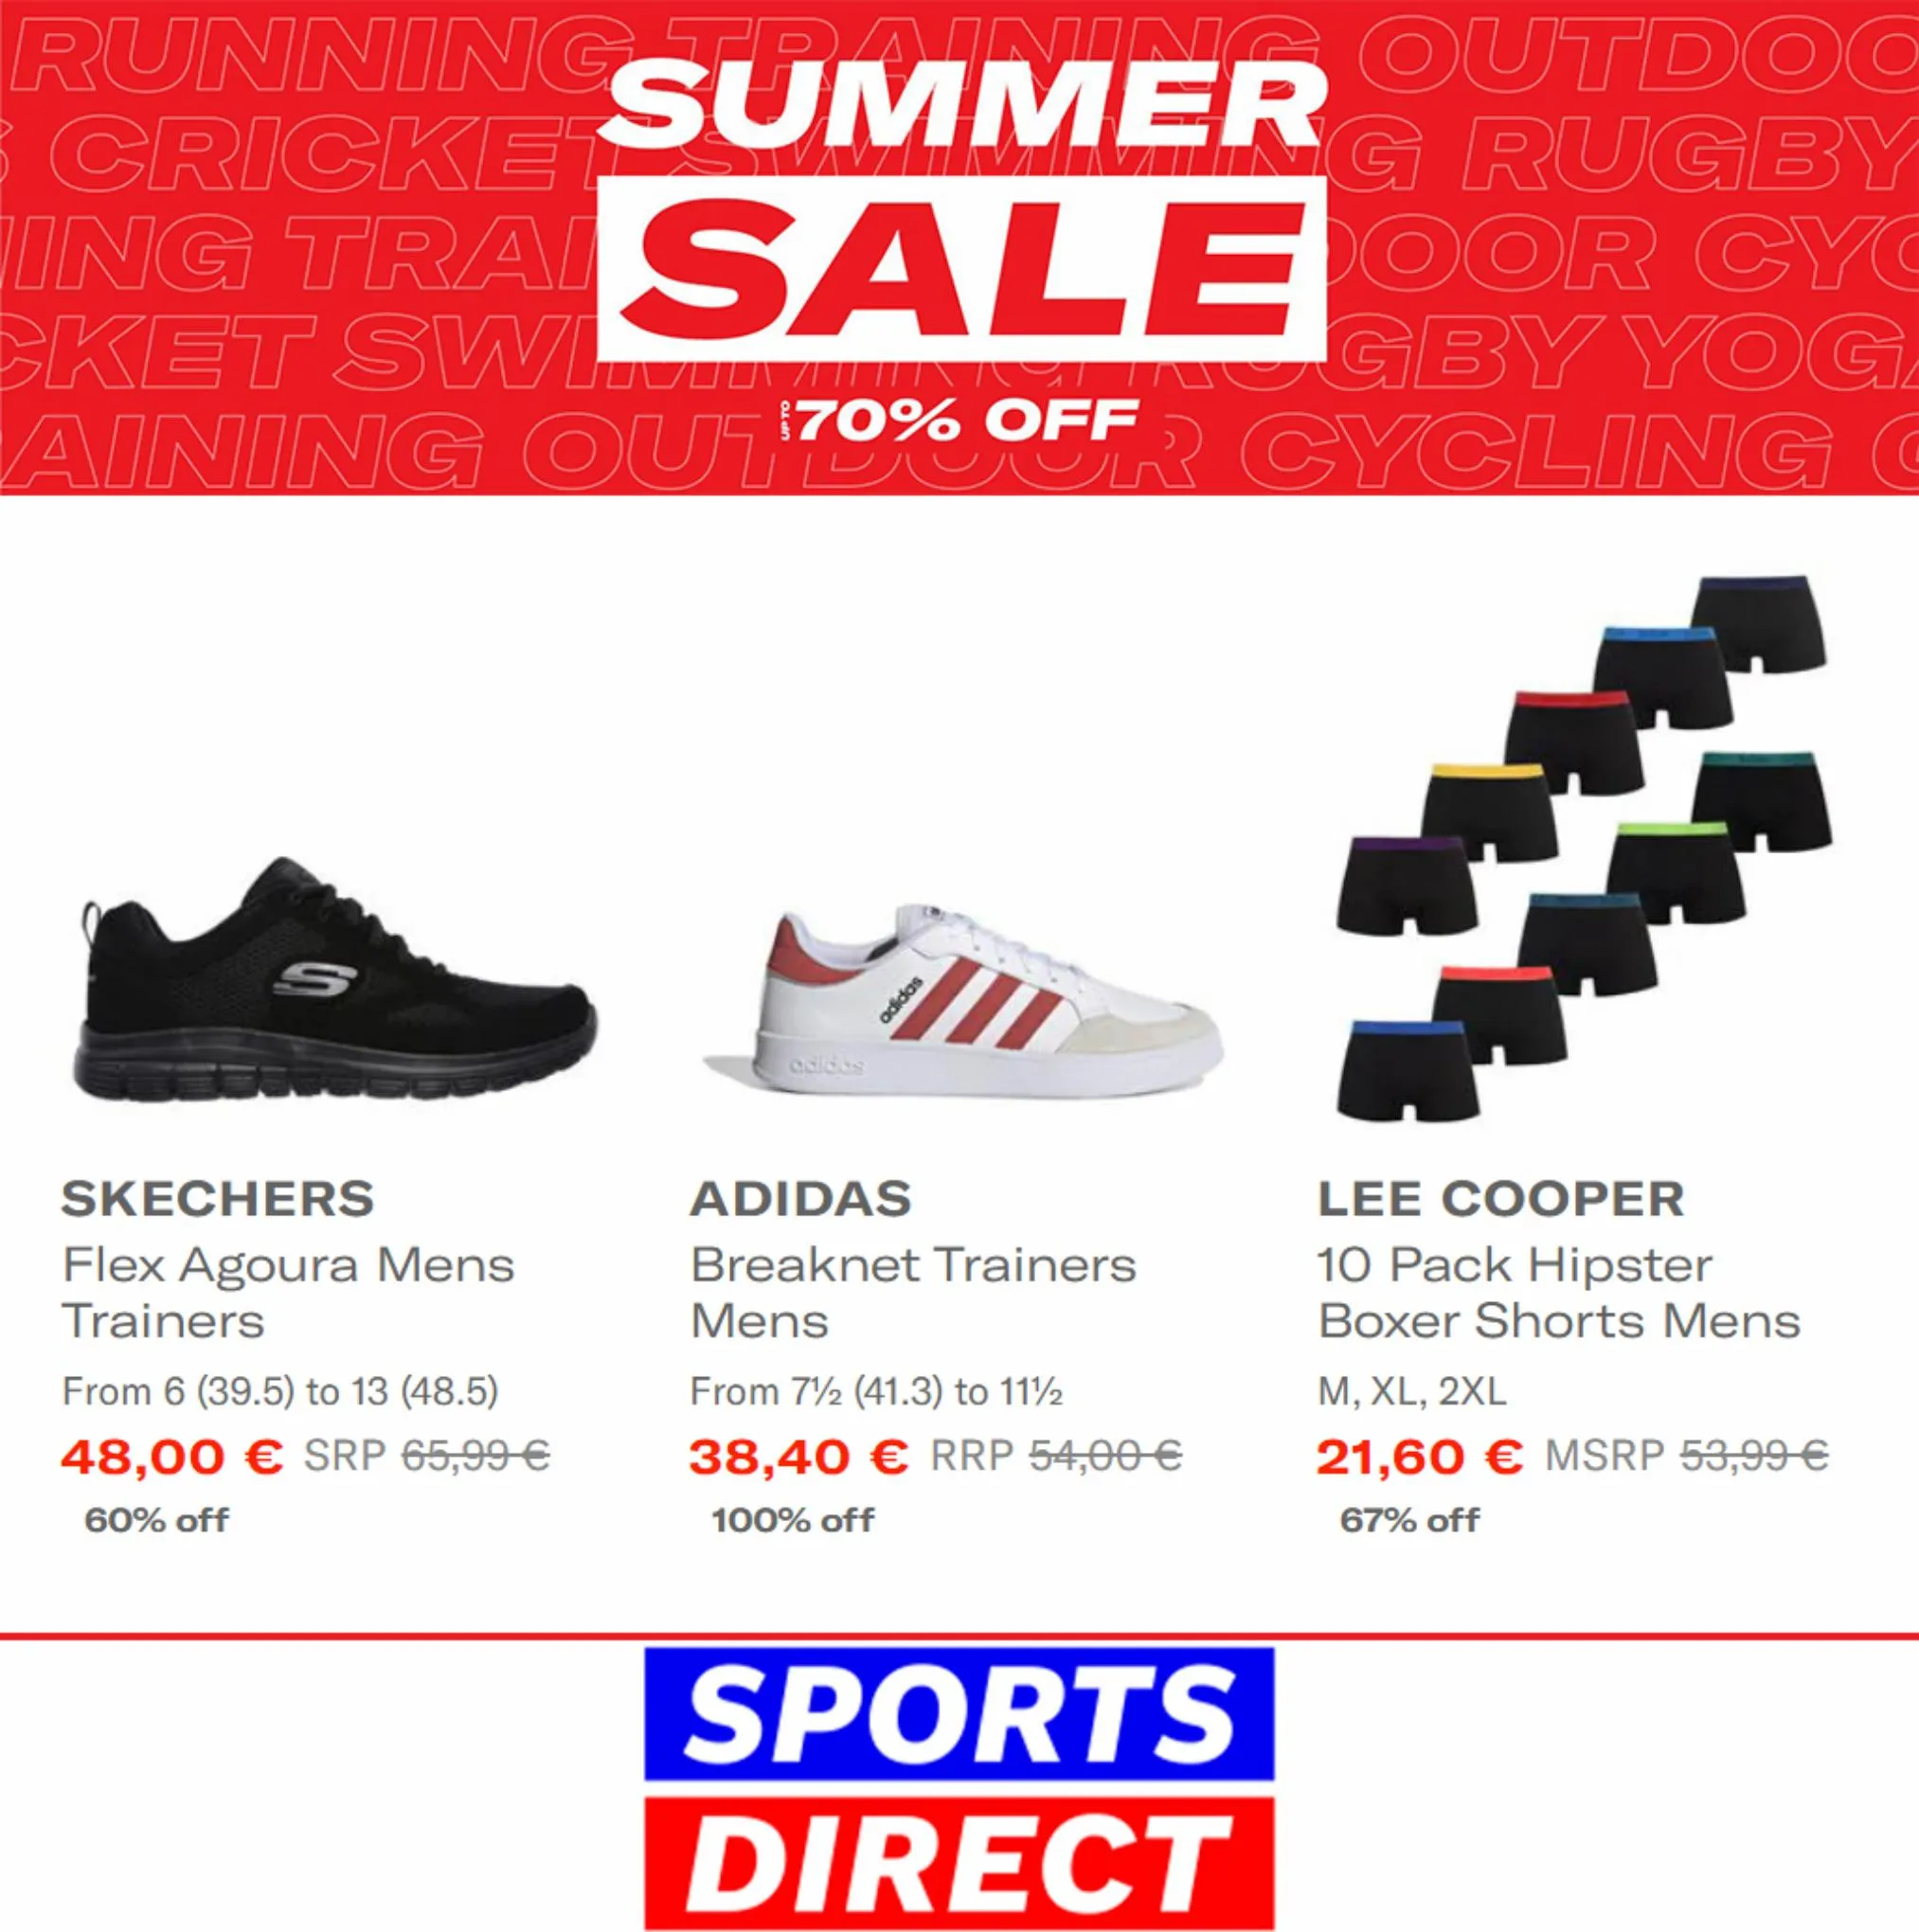 Catalogue Summer Sale -70%, page 00002